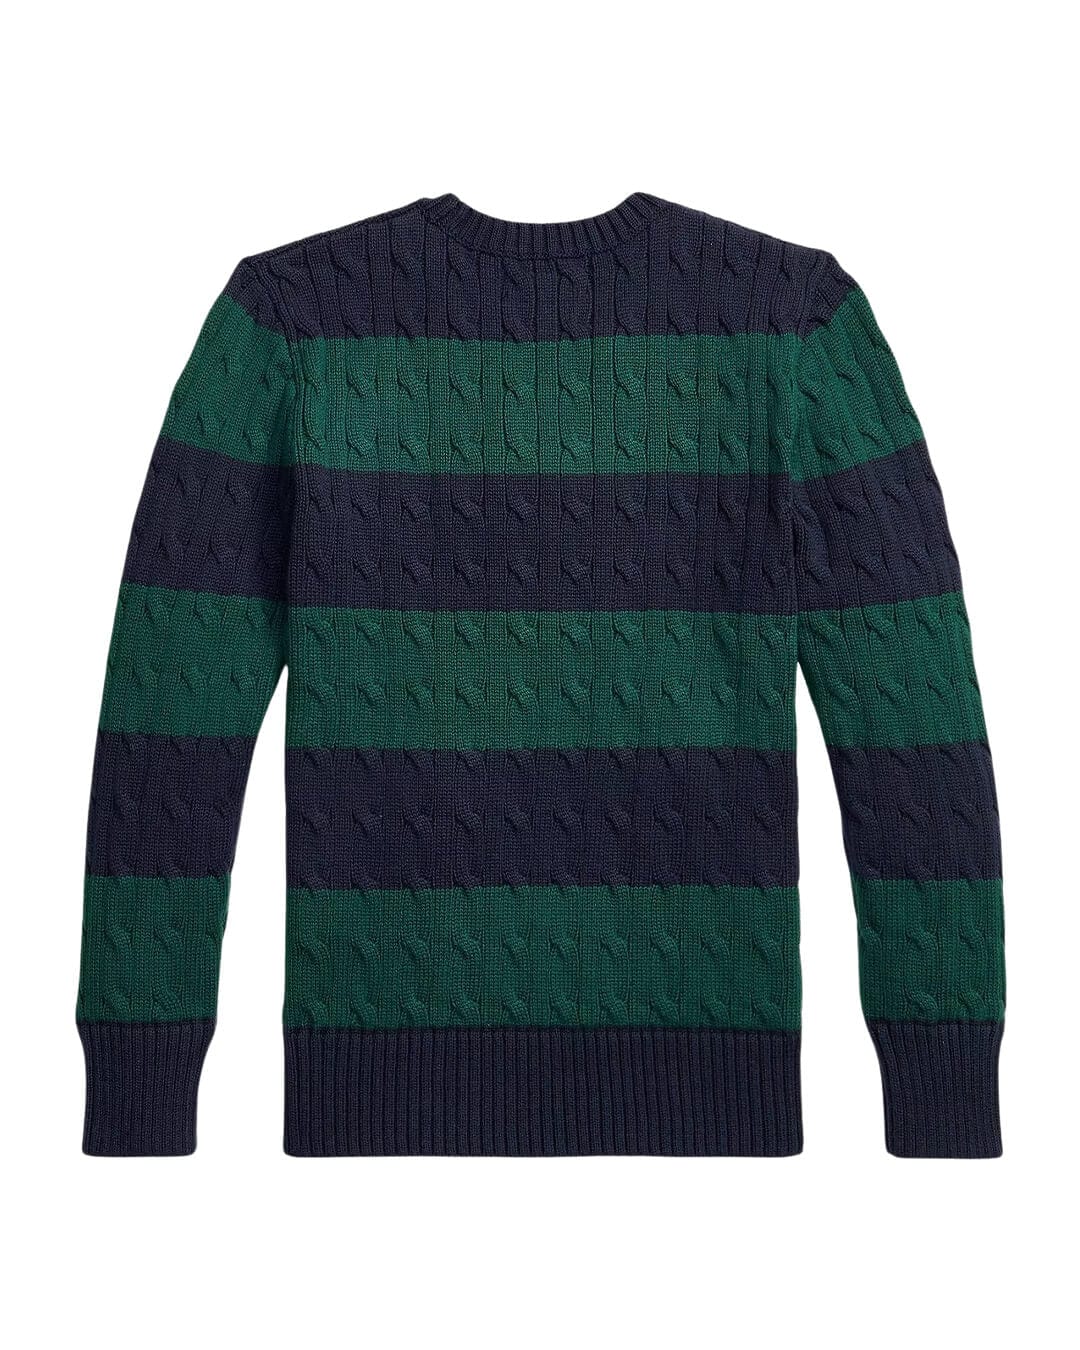 Polo Ralph Lauren Jumpers Boys Polo Ralph Lauren Navy And Green Striped Cable Knit Cotton Jumper